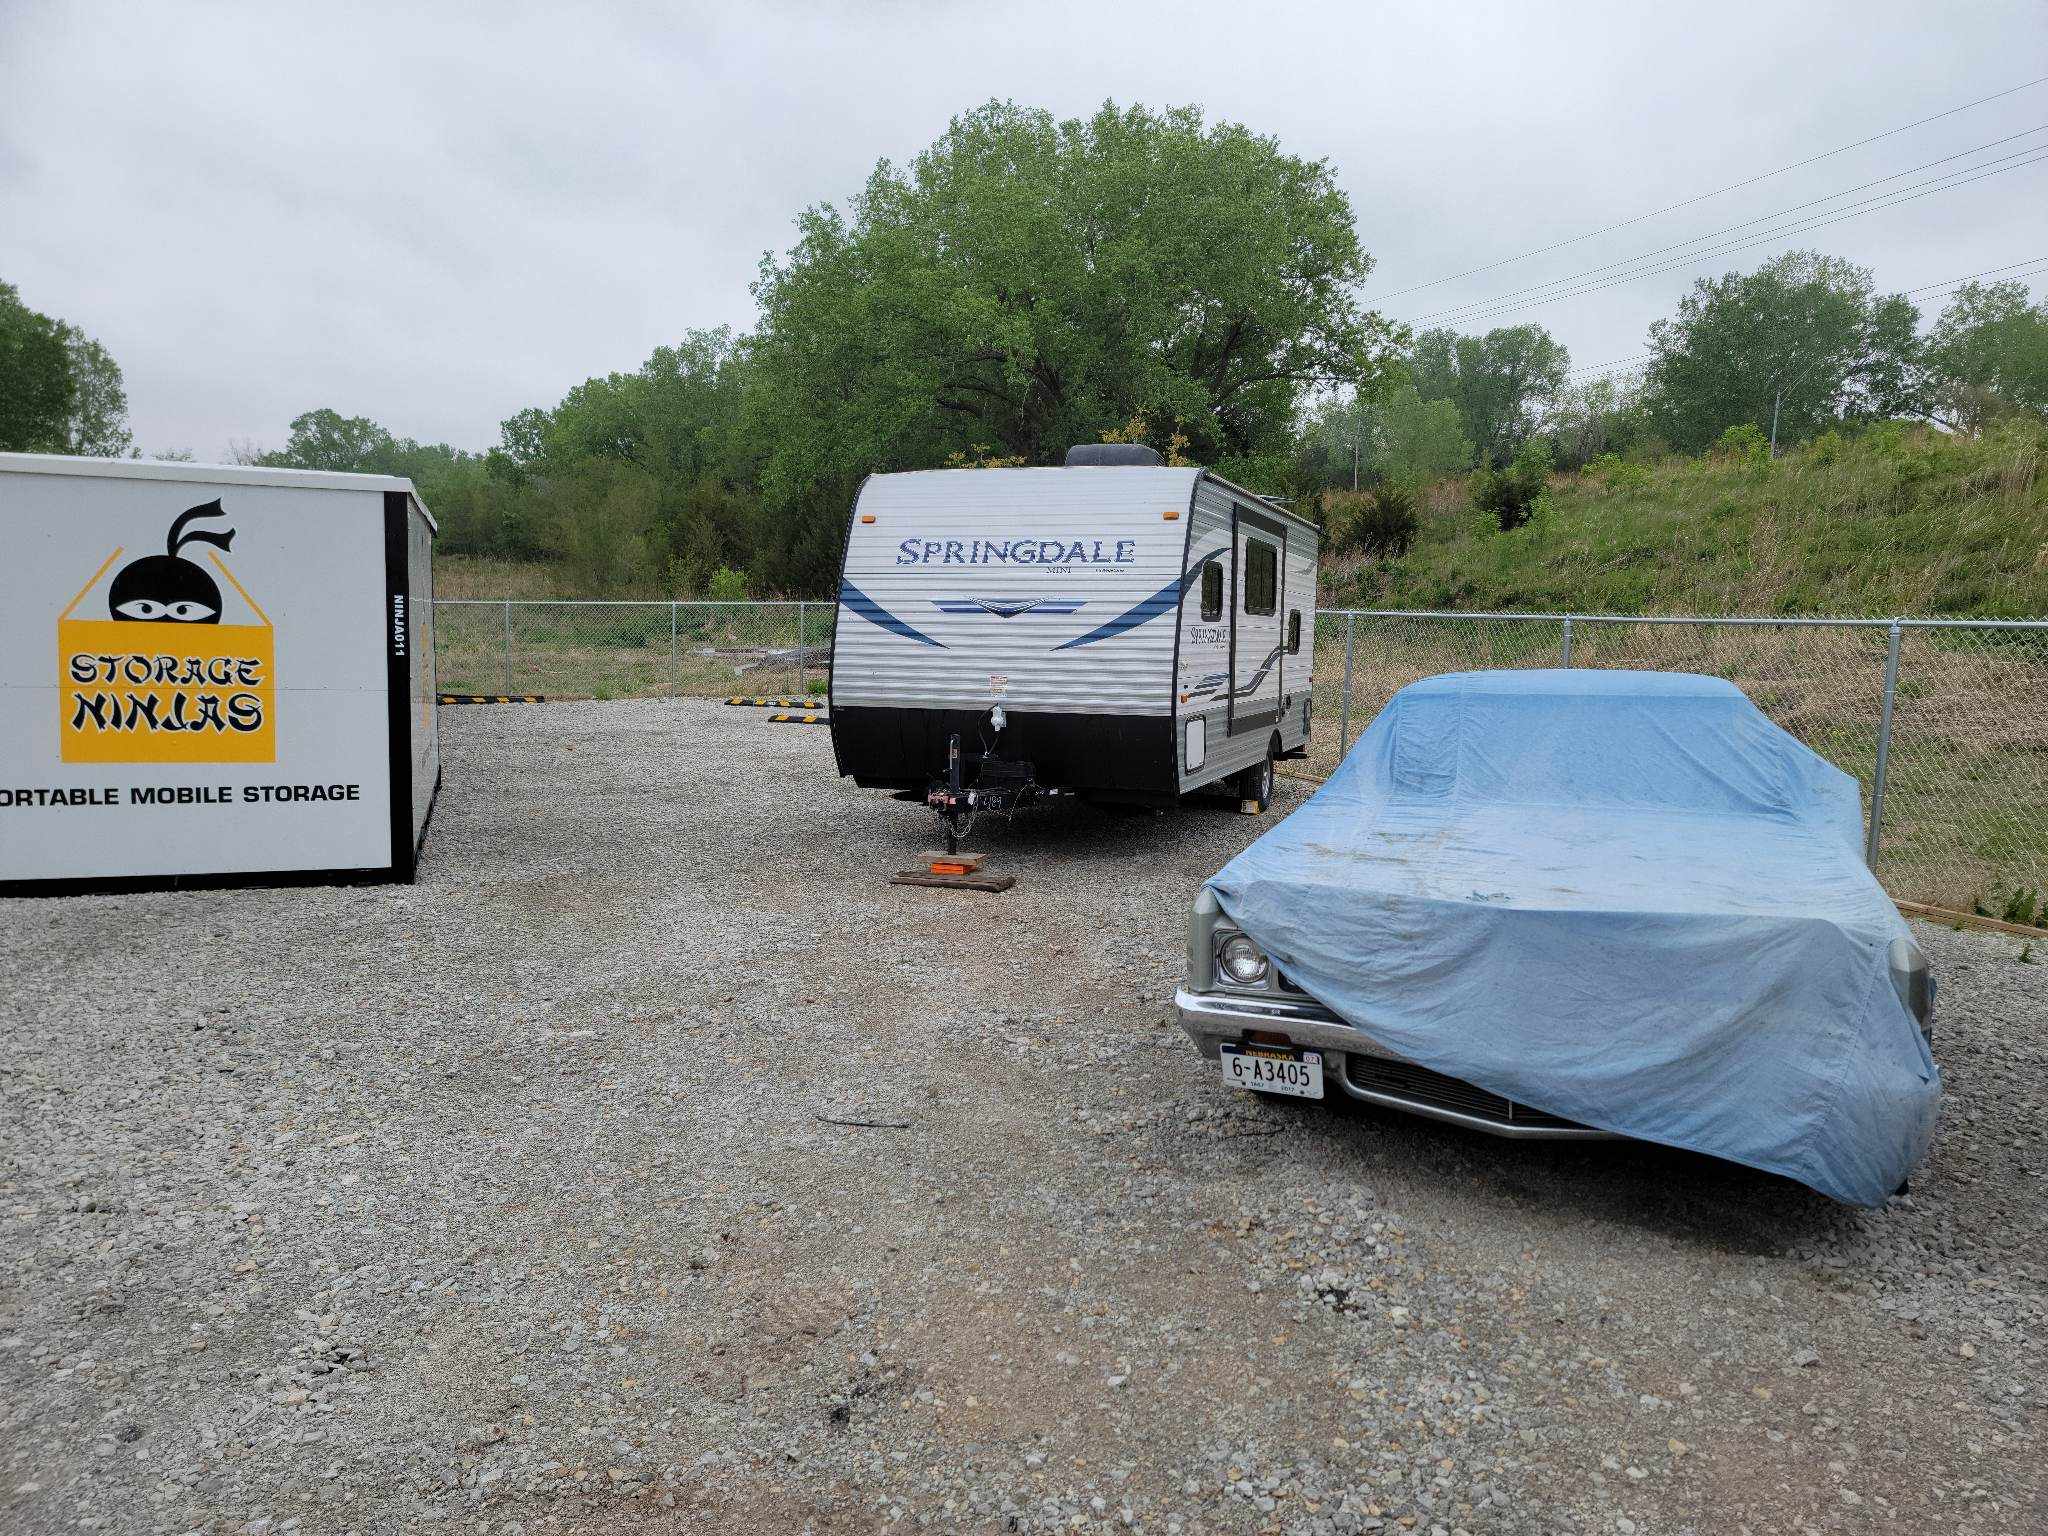 A Storage Ninjas Portable Container near a parked RV and covered car on gravel.